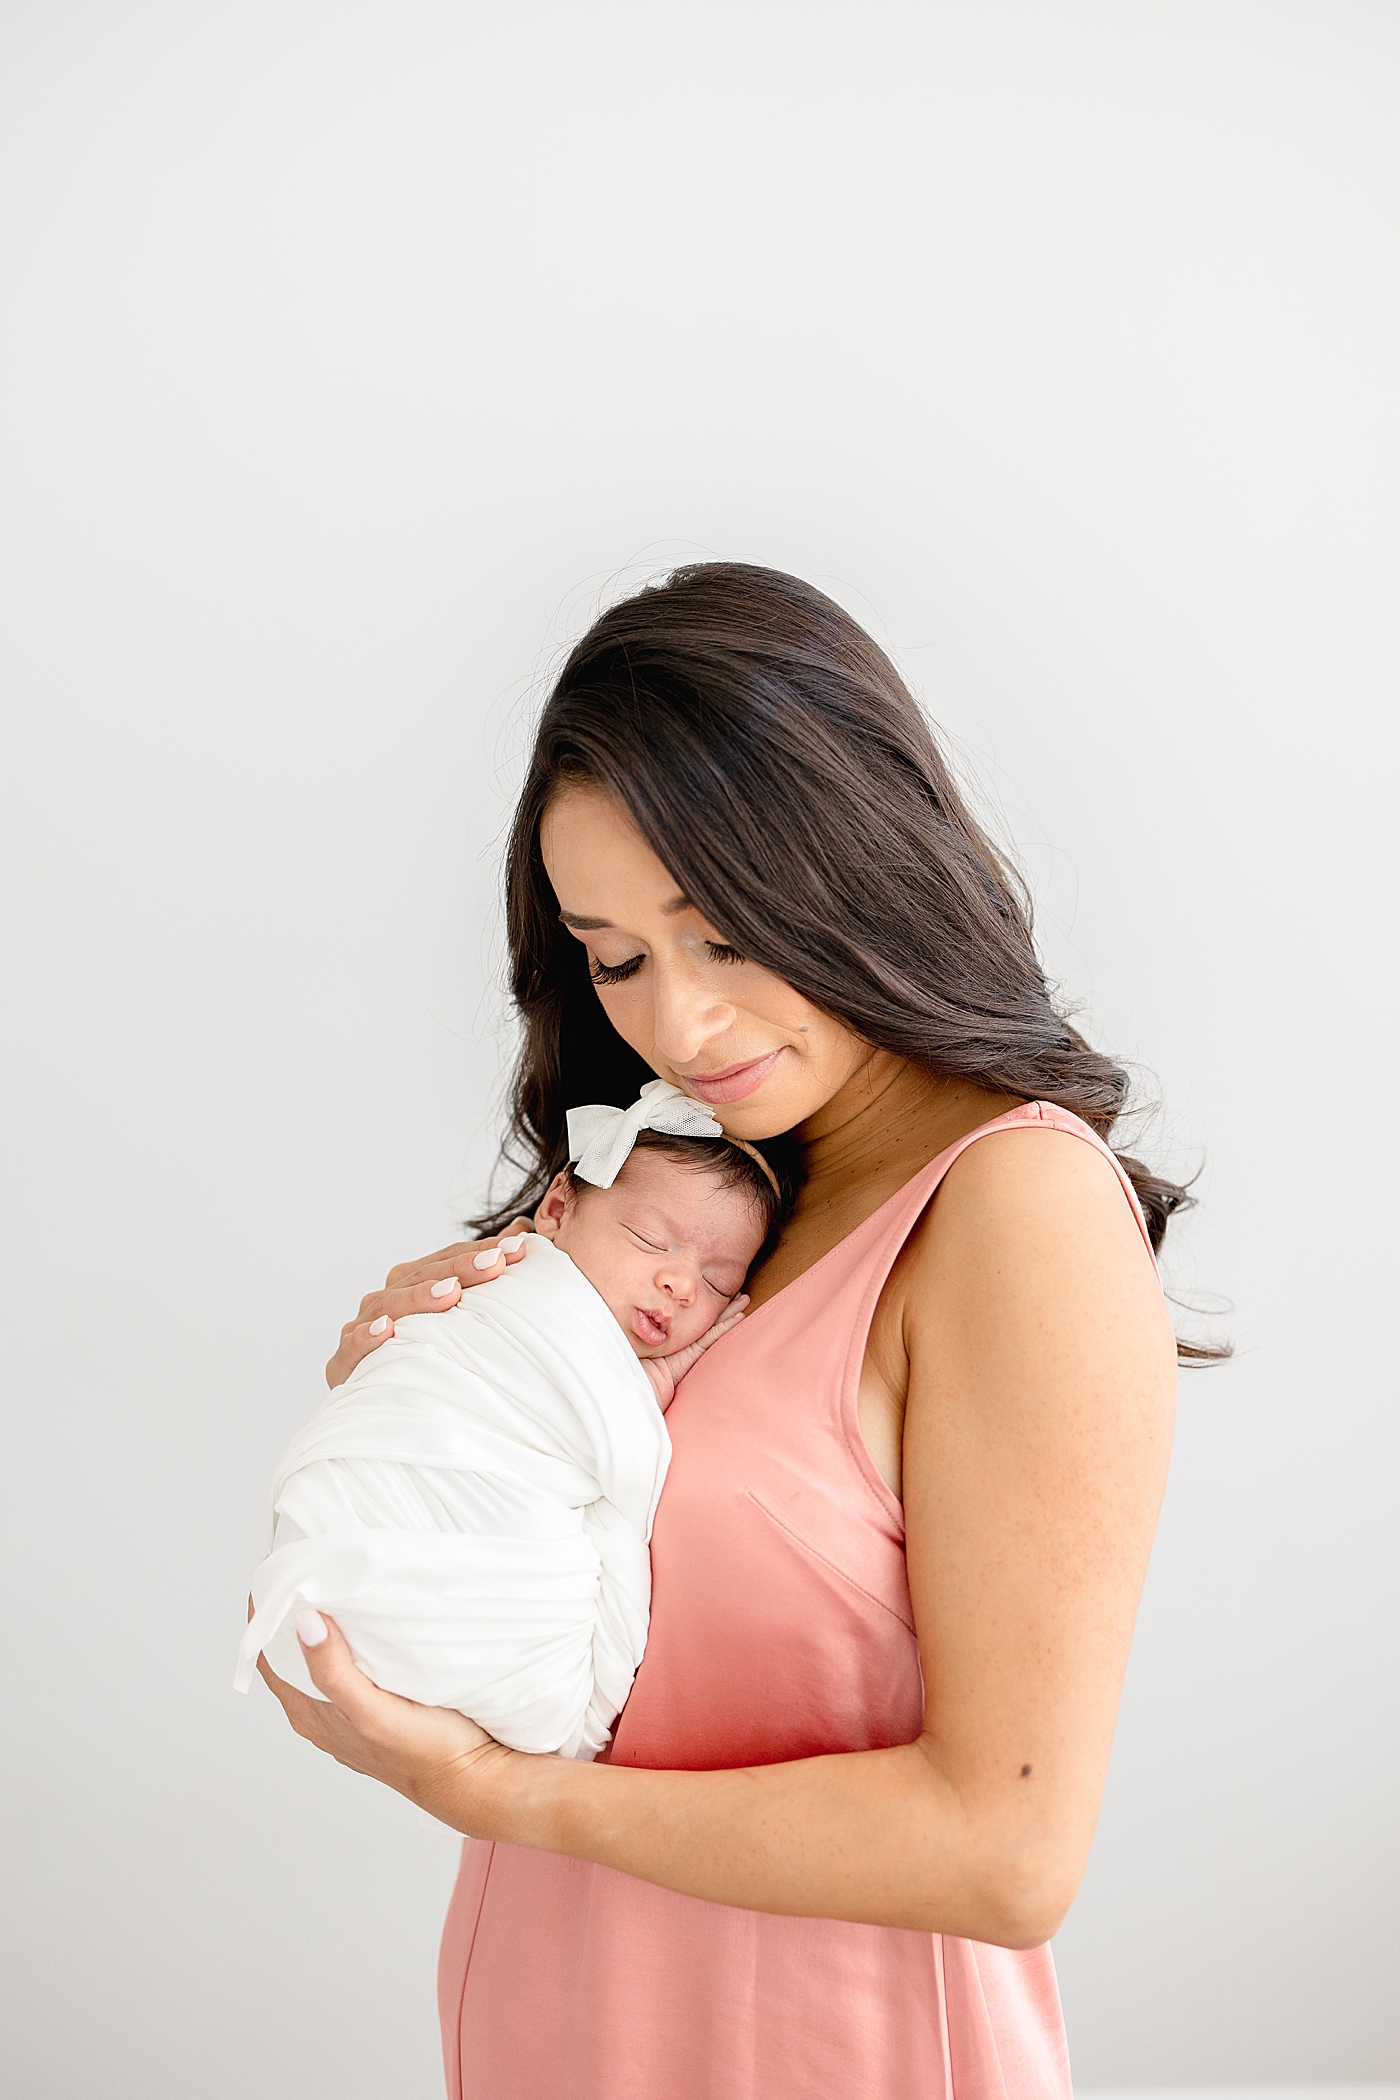 Mom holding her baby girl on her chest. Photo by Brittany Elise Photography.